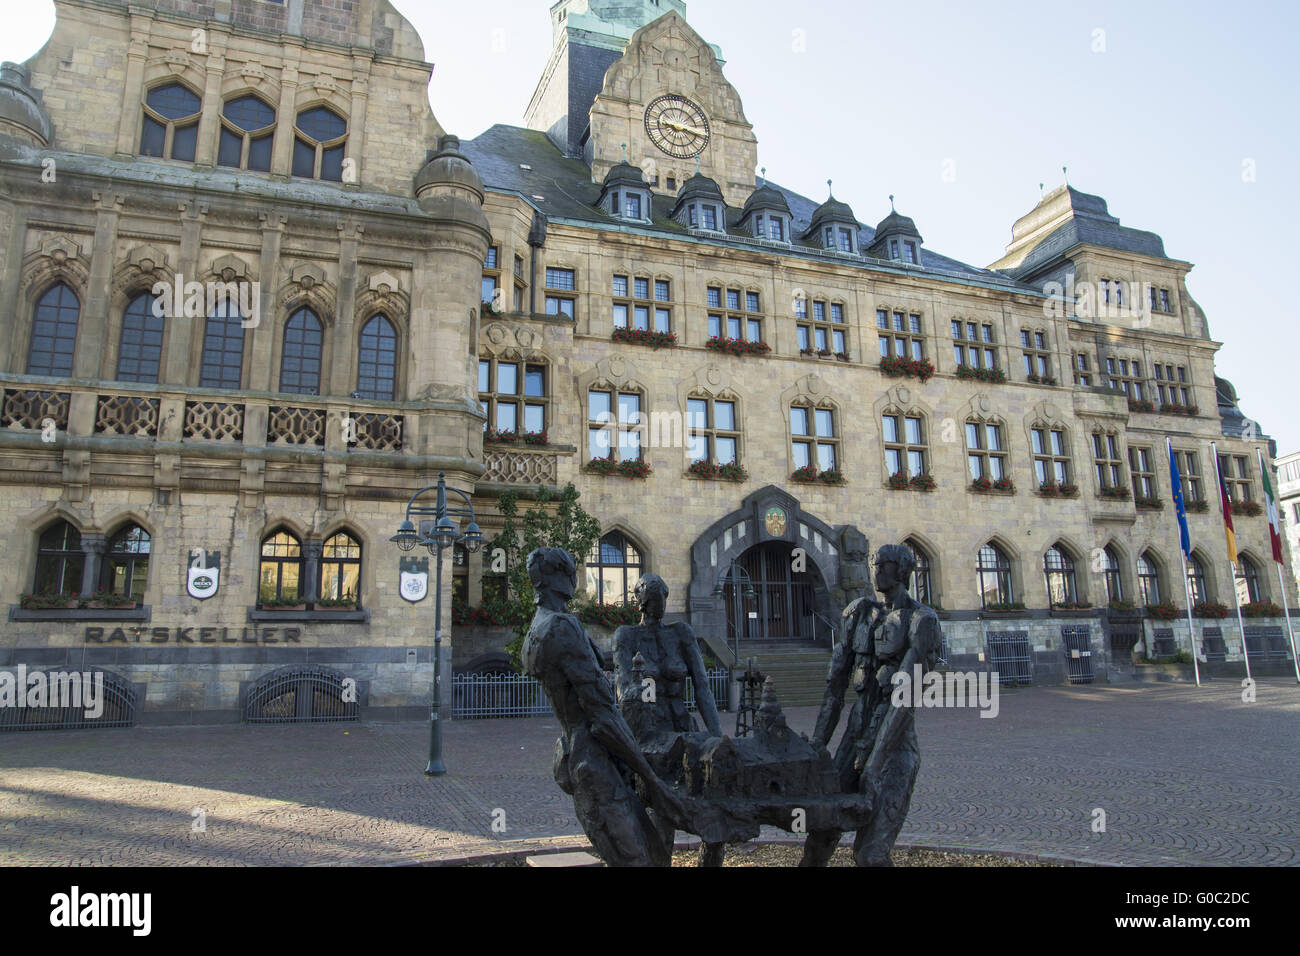 Sculpture at the Town hall of Recklinghausen, Germ Stock Photo